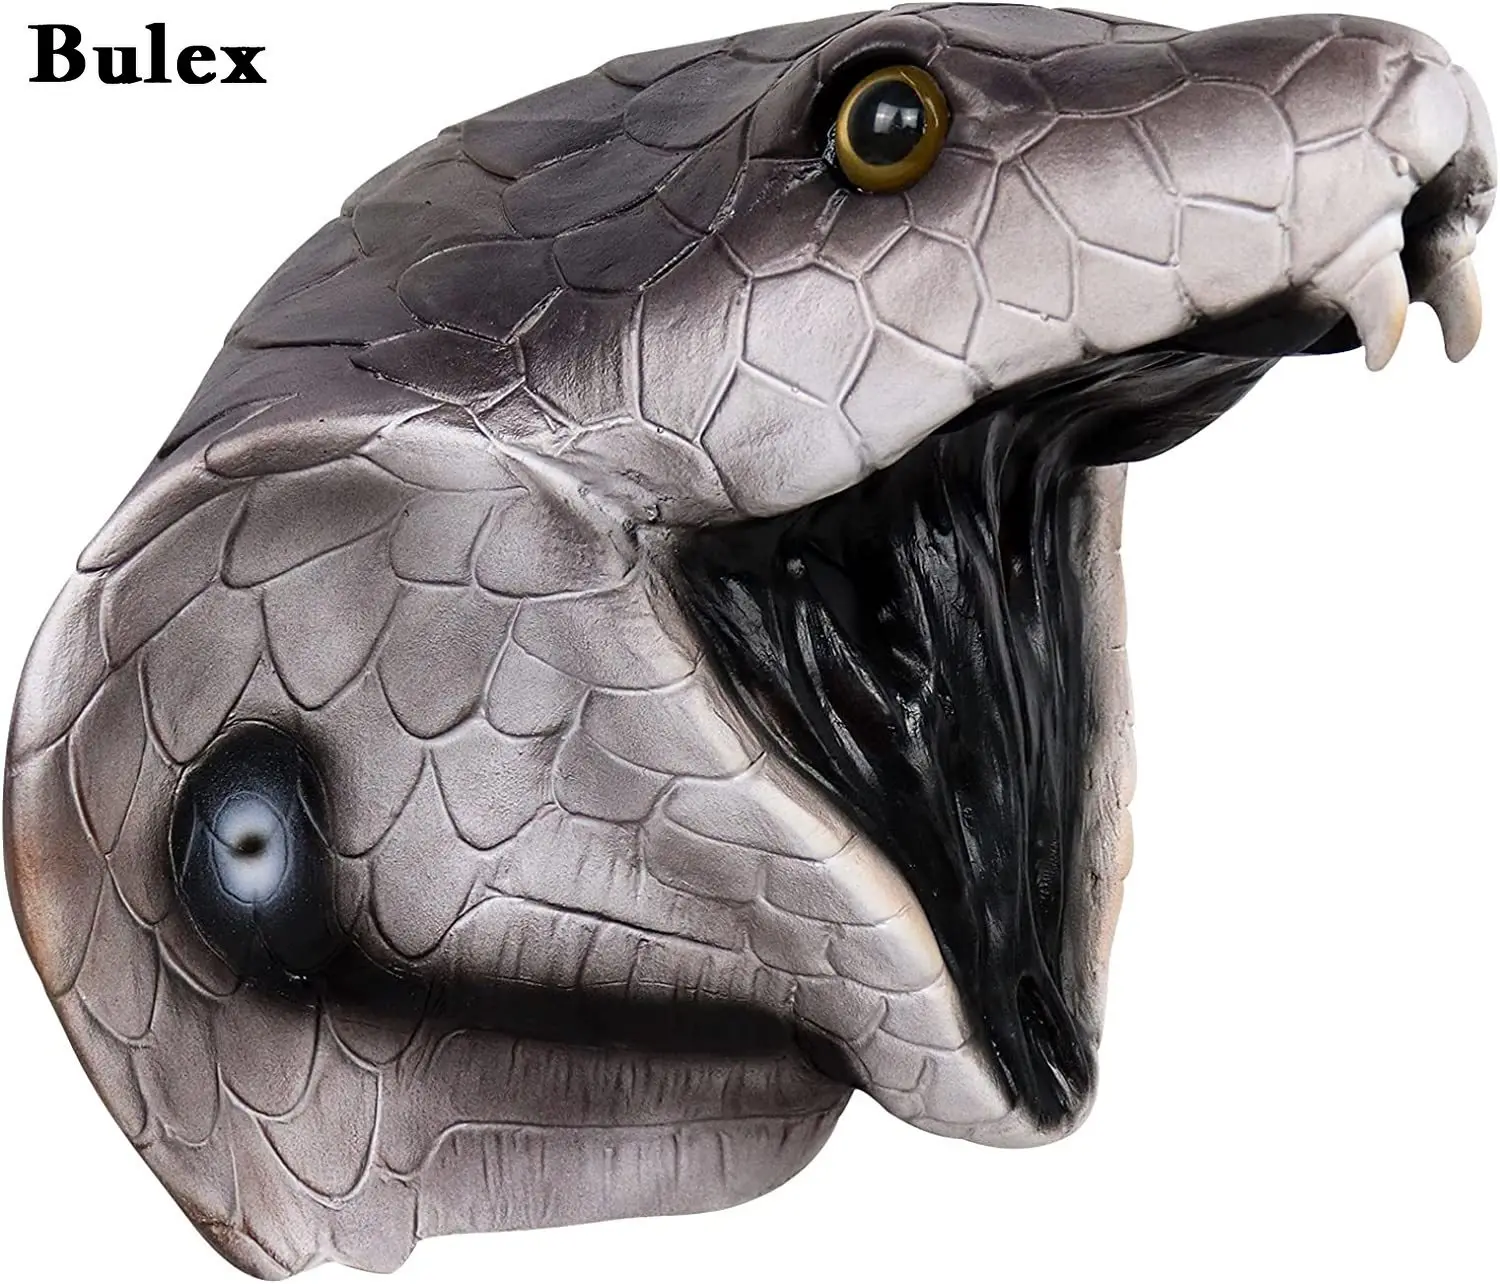 Bulex Creepy Snake Mask Realistic Scary Cobra Head Animal Mask for Halloween Cosplay Carnival Party Masquerade Costume